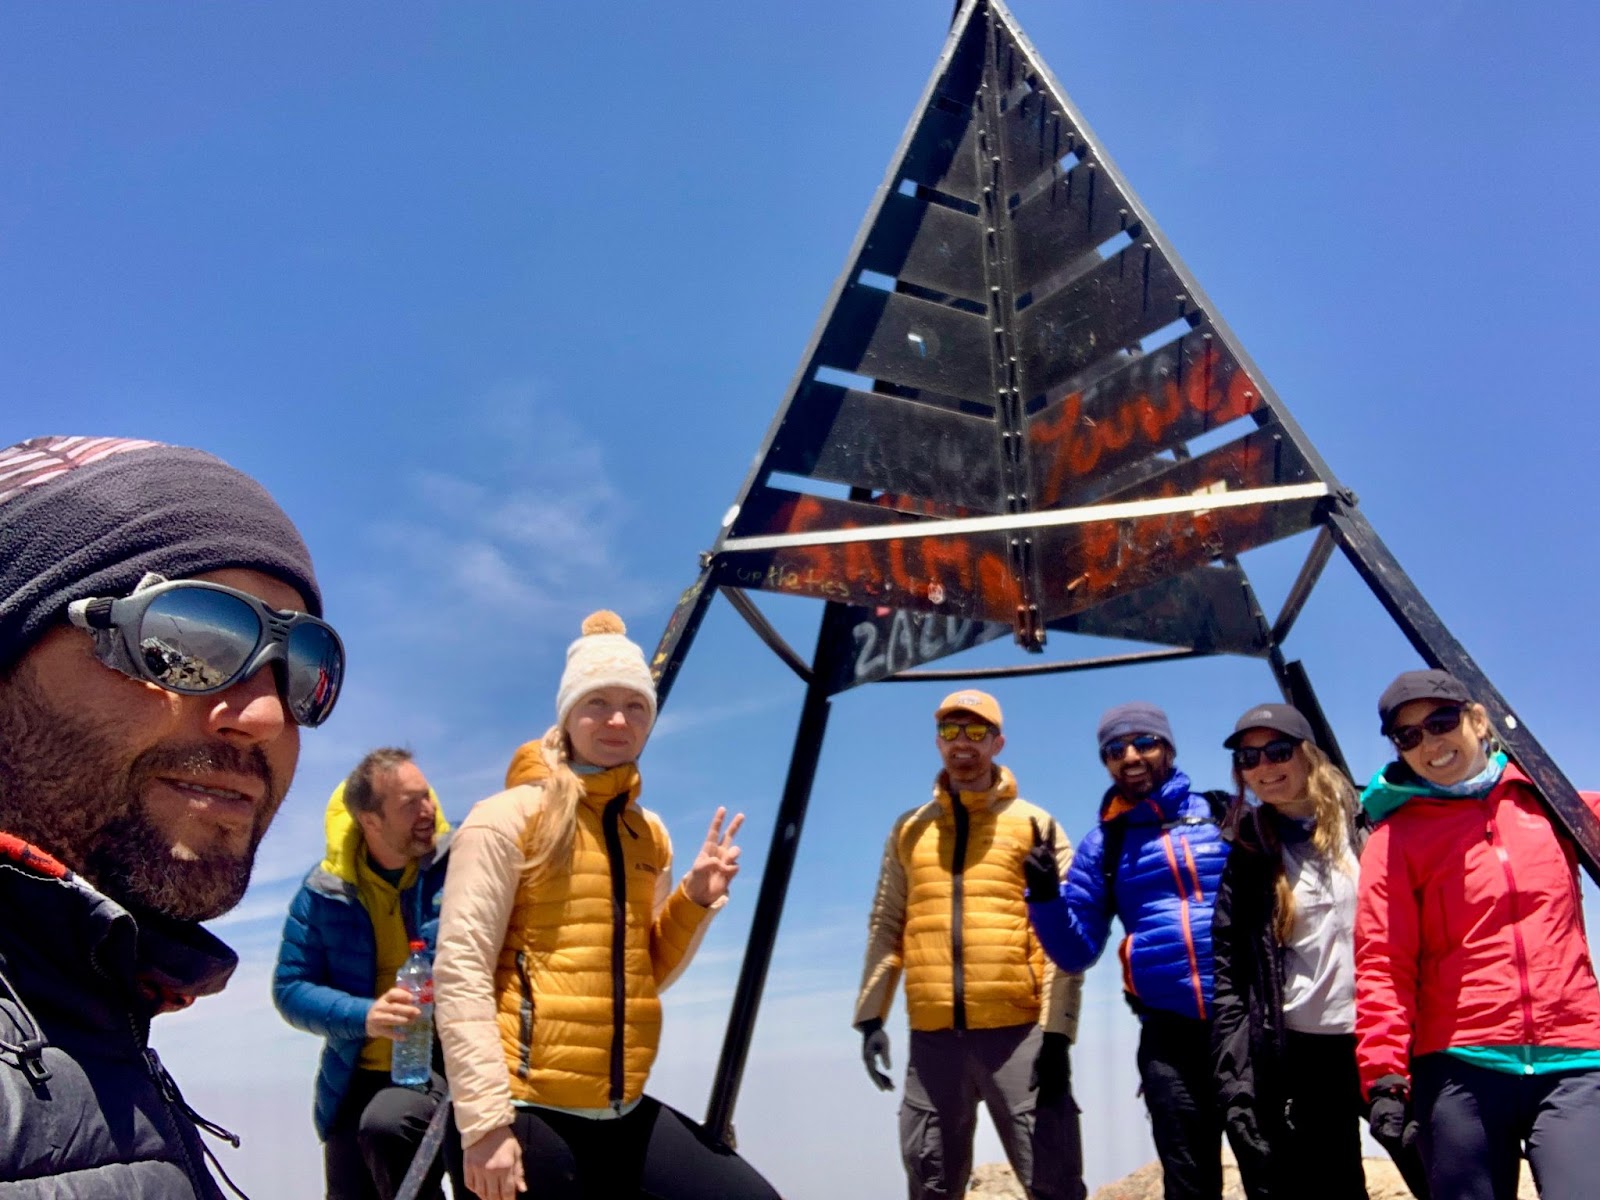 The group at the summit of Mount Toubkal.